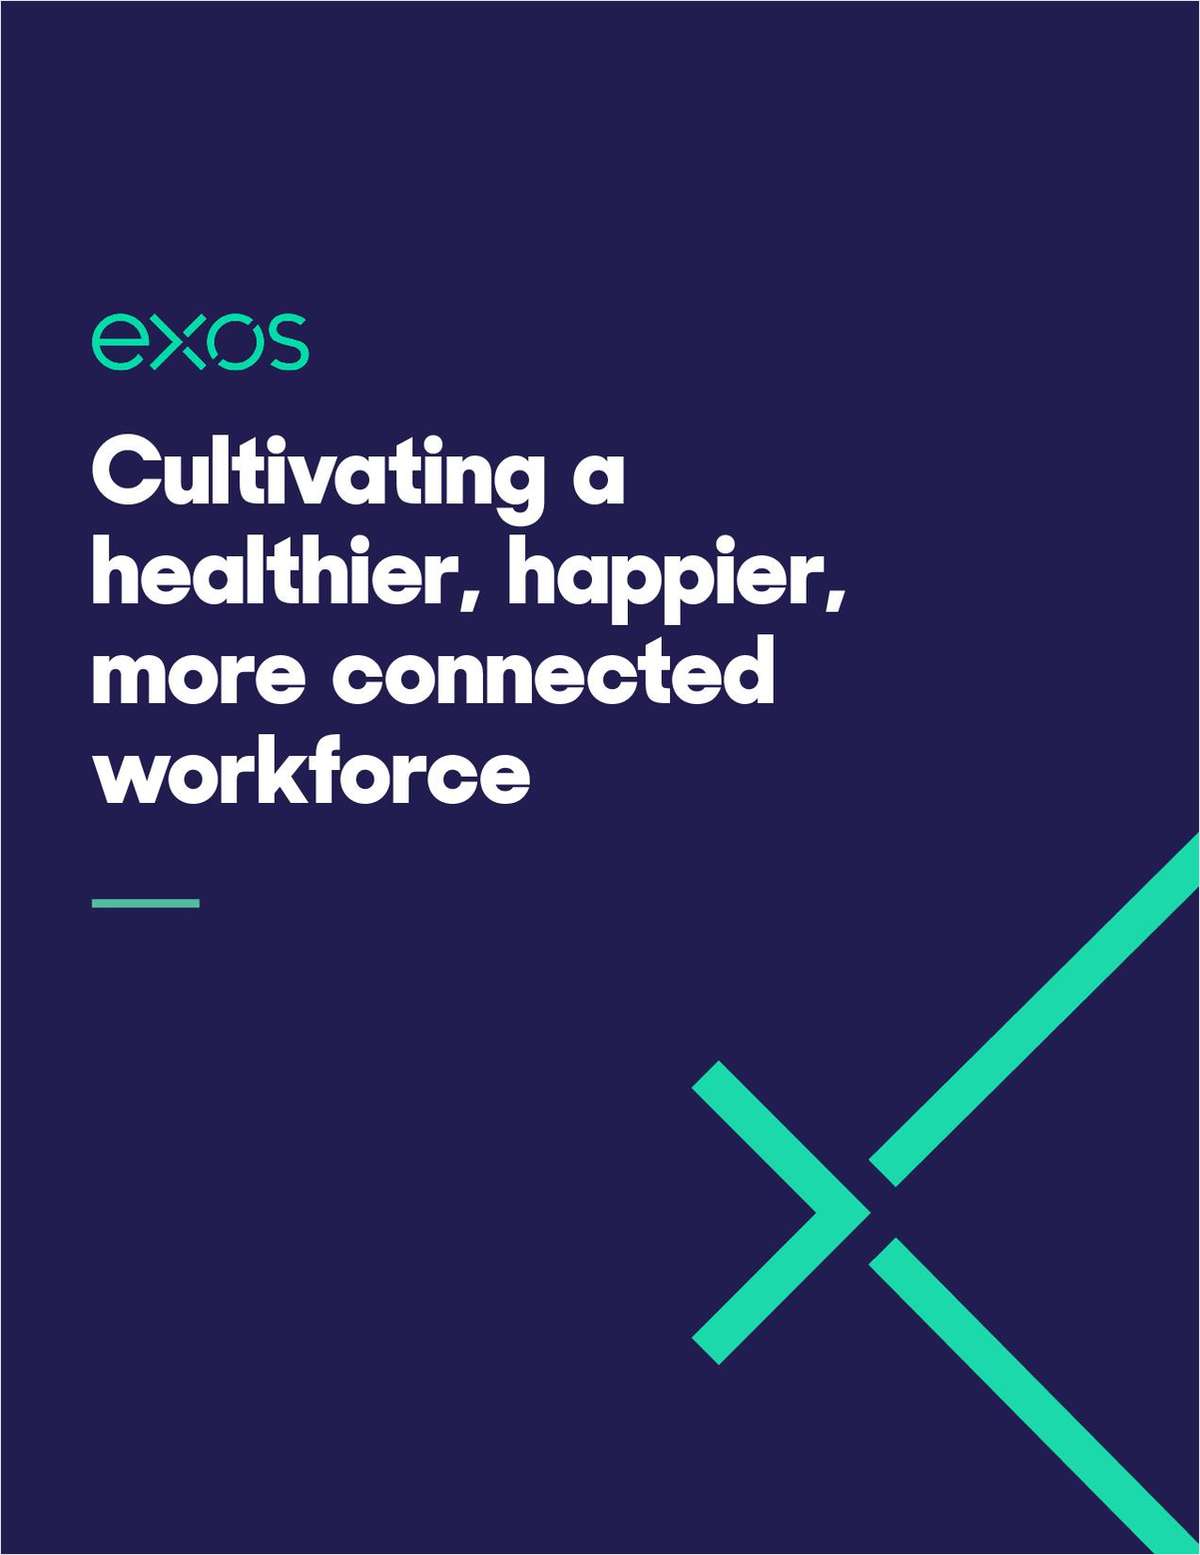 How to Cultivate a Healthier, Happier, more Connected Workforce